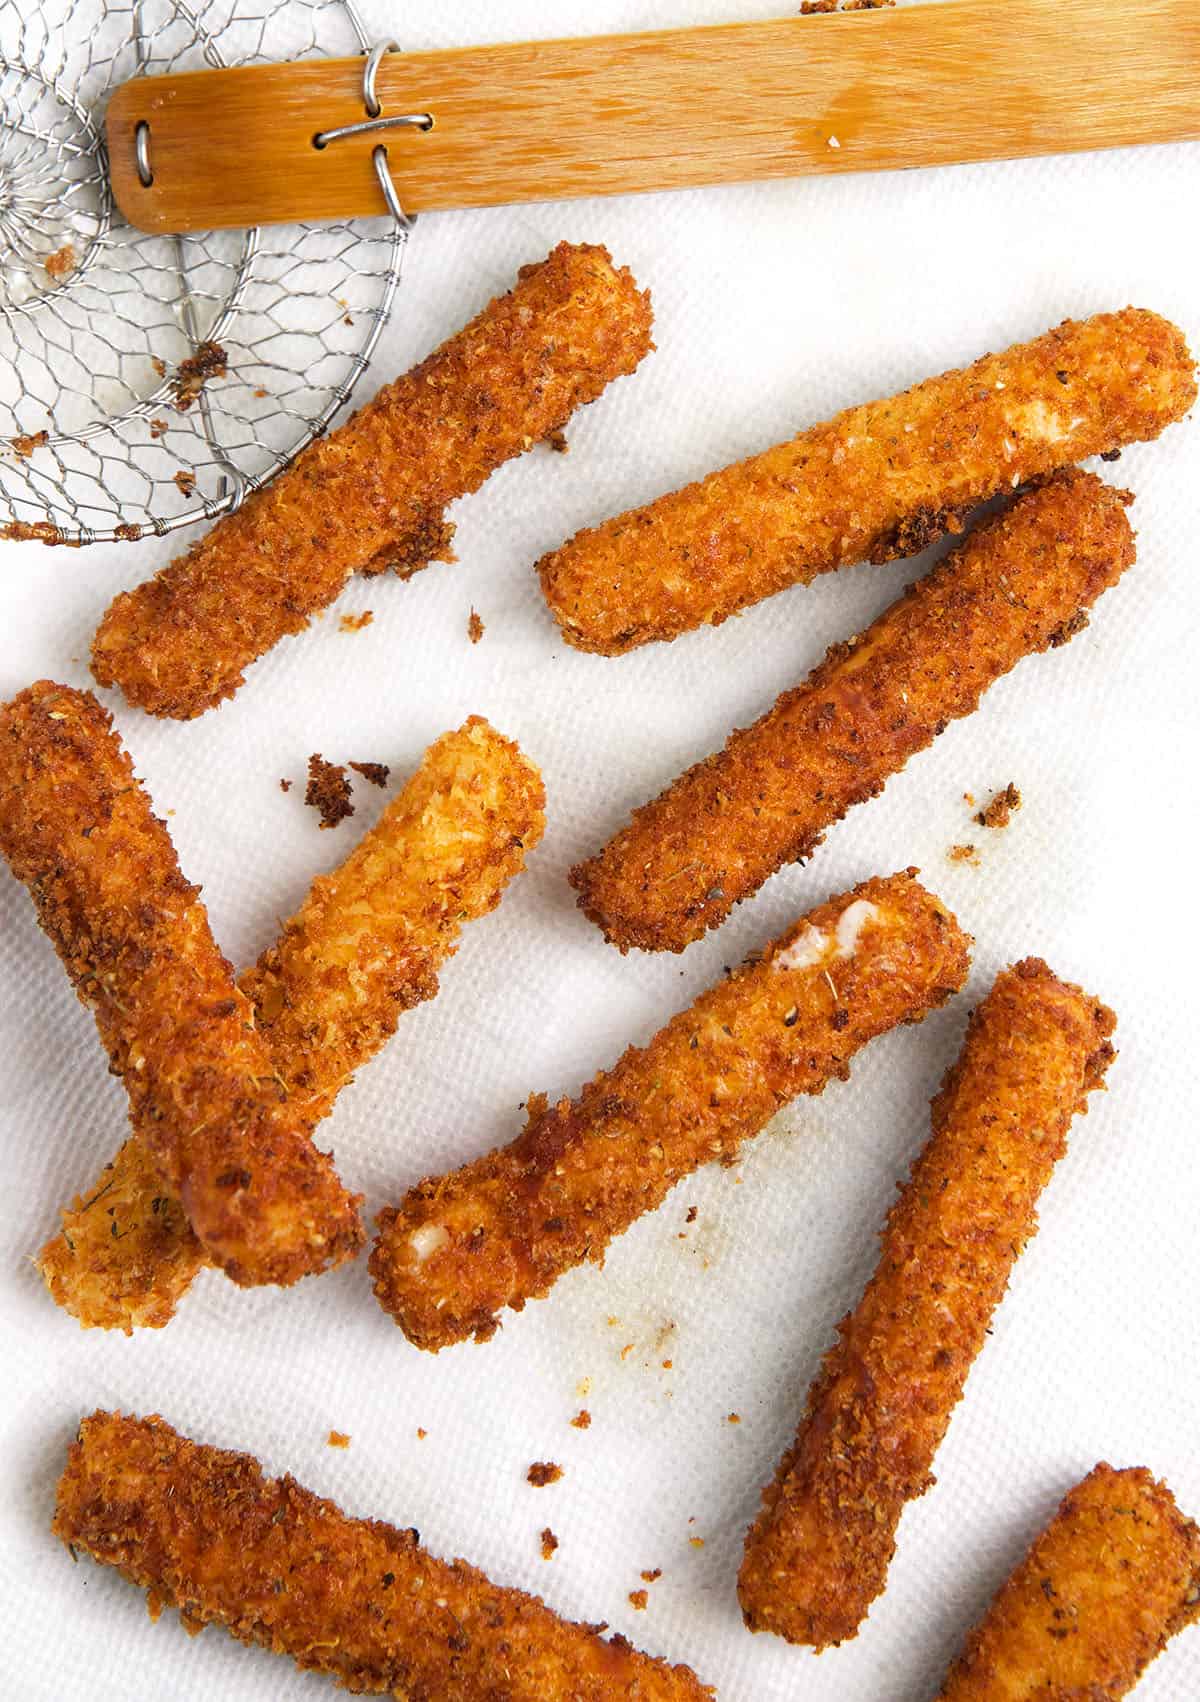 A batch of mozzarella sticks are spread out on a white surface.